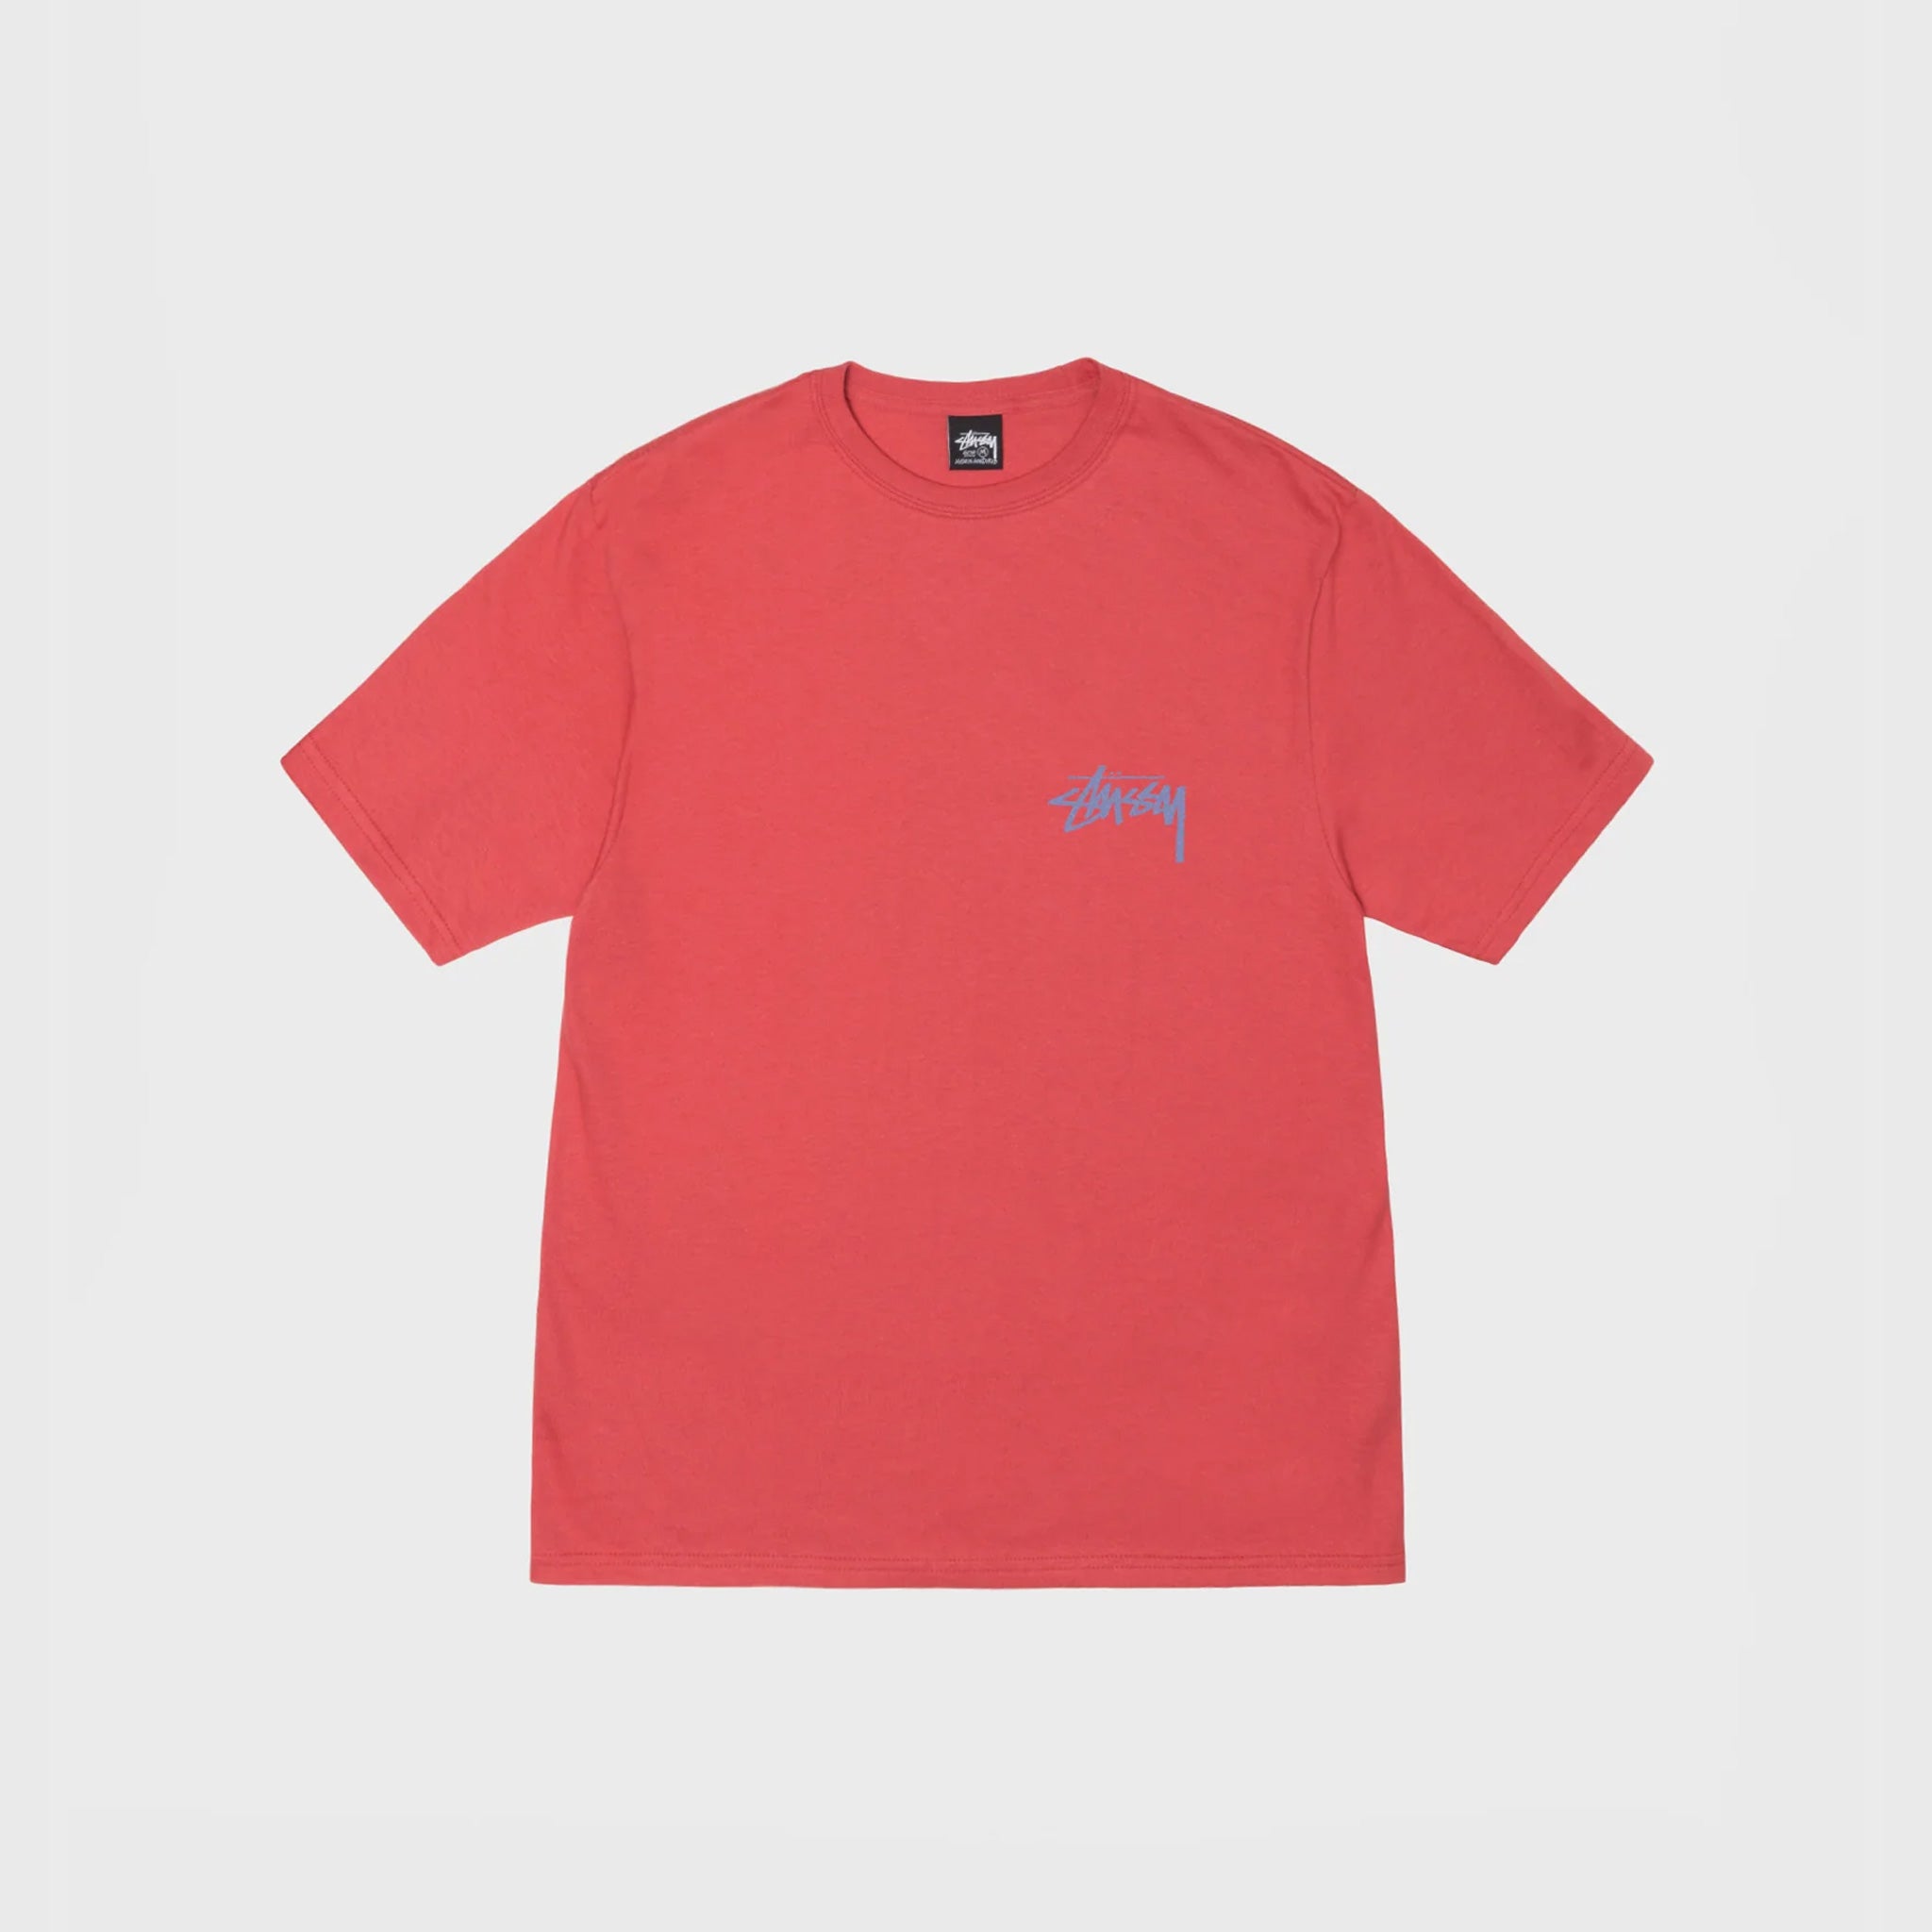 Flat photo of the front of a red t shirt with the stussy logo in blue writing.